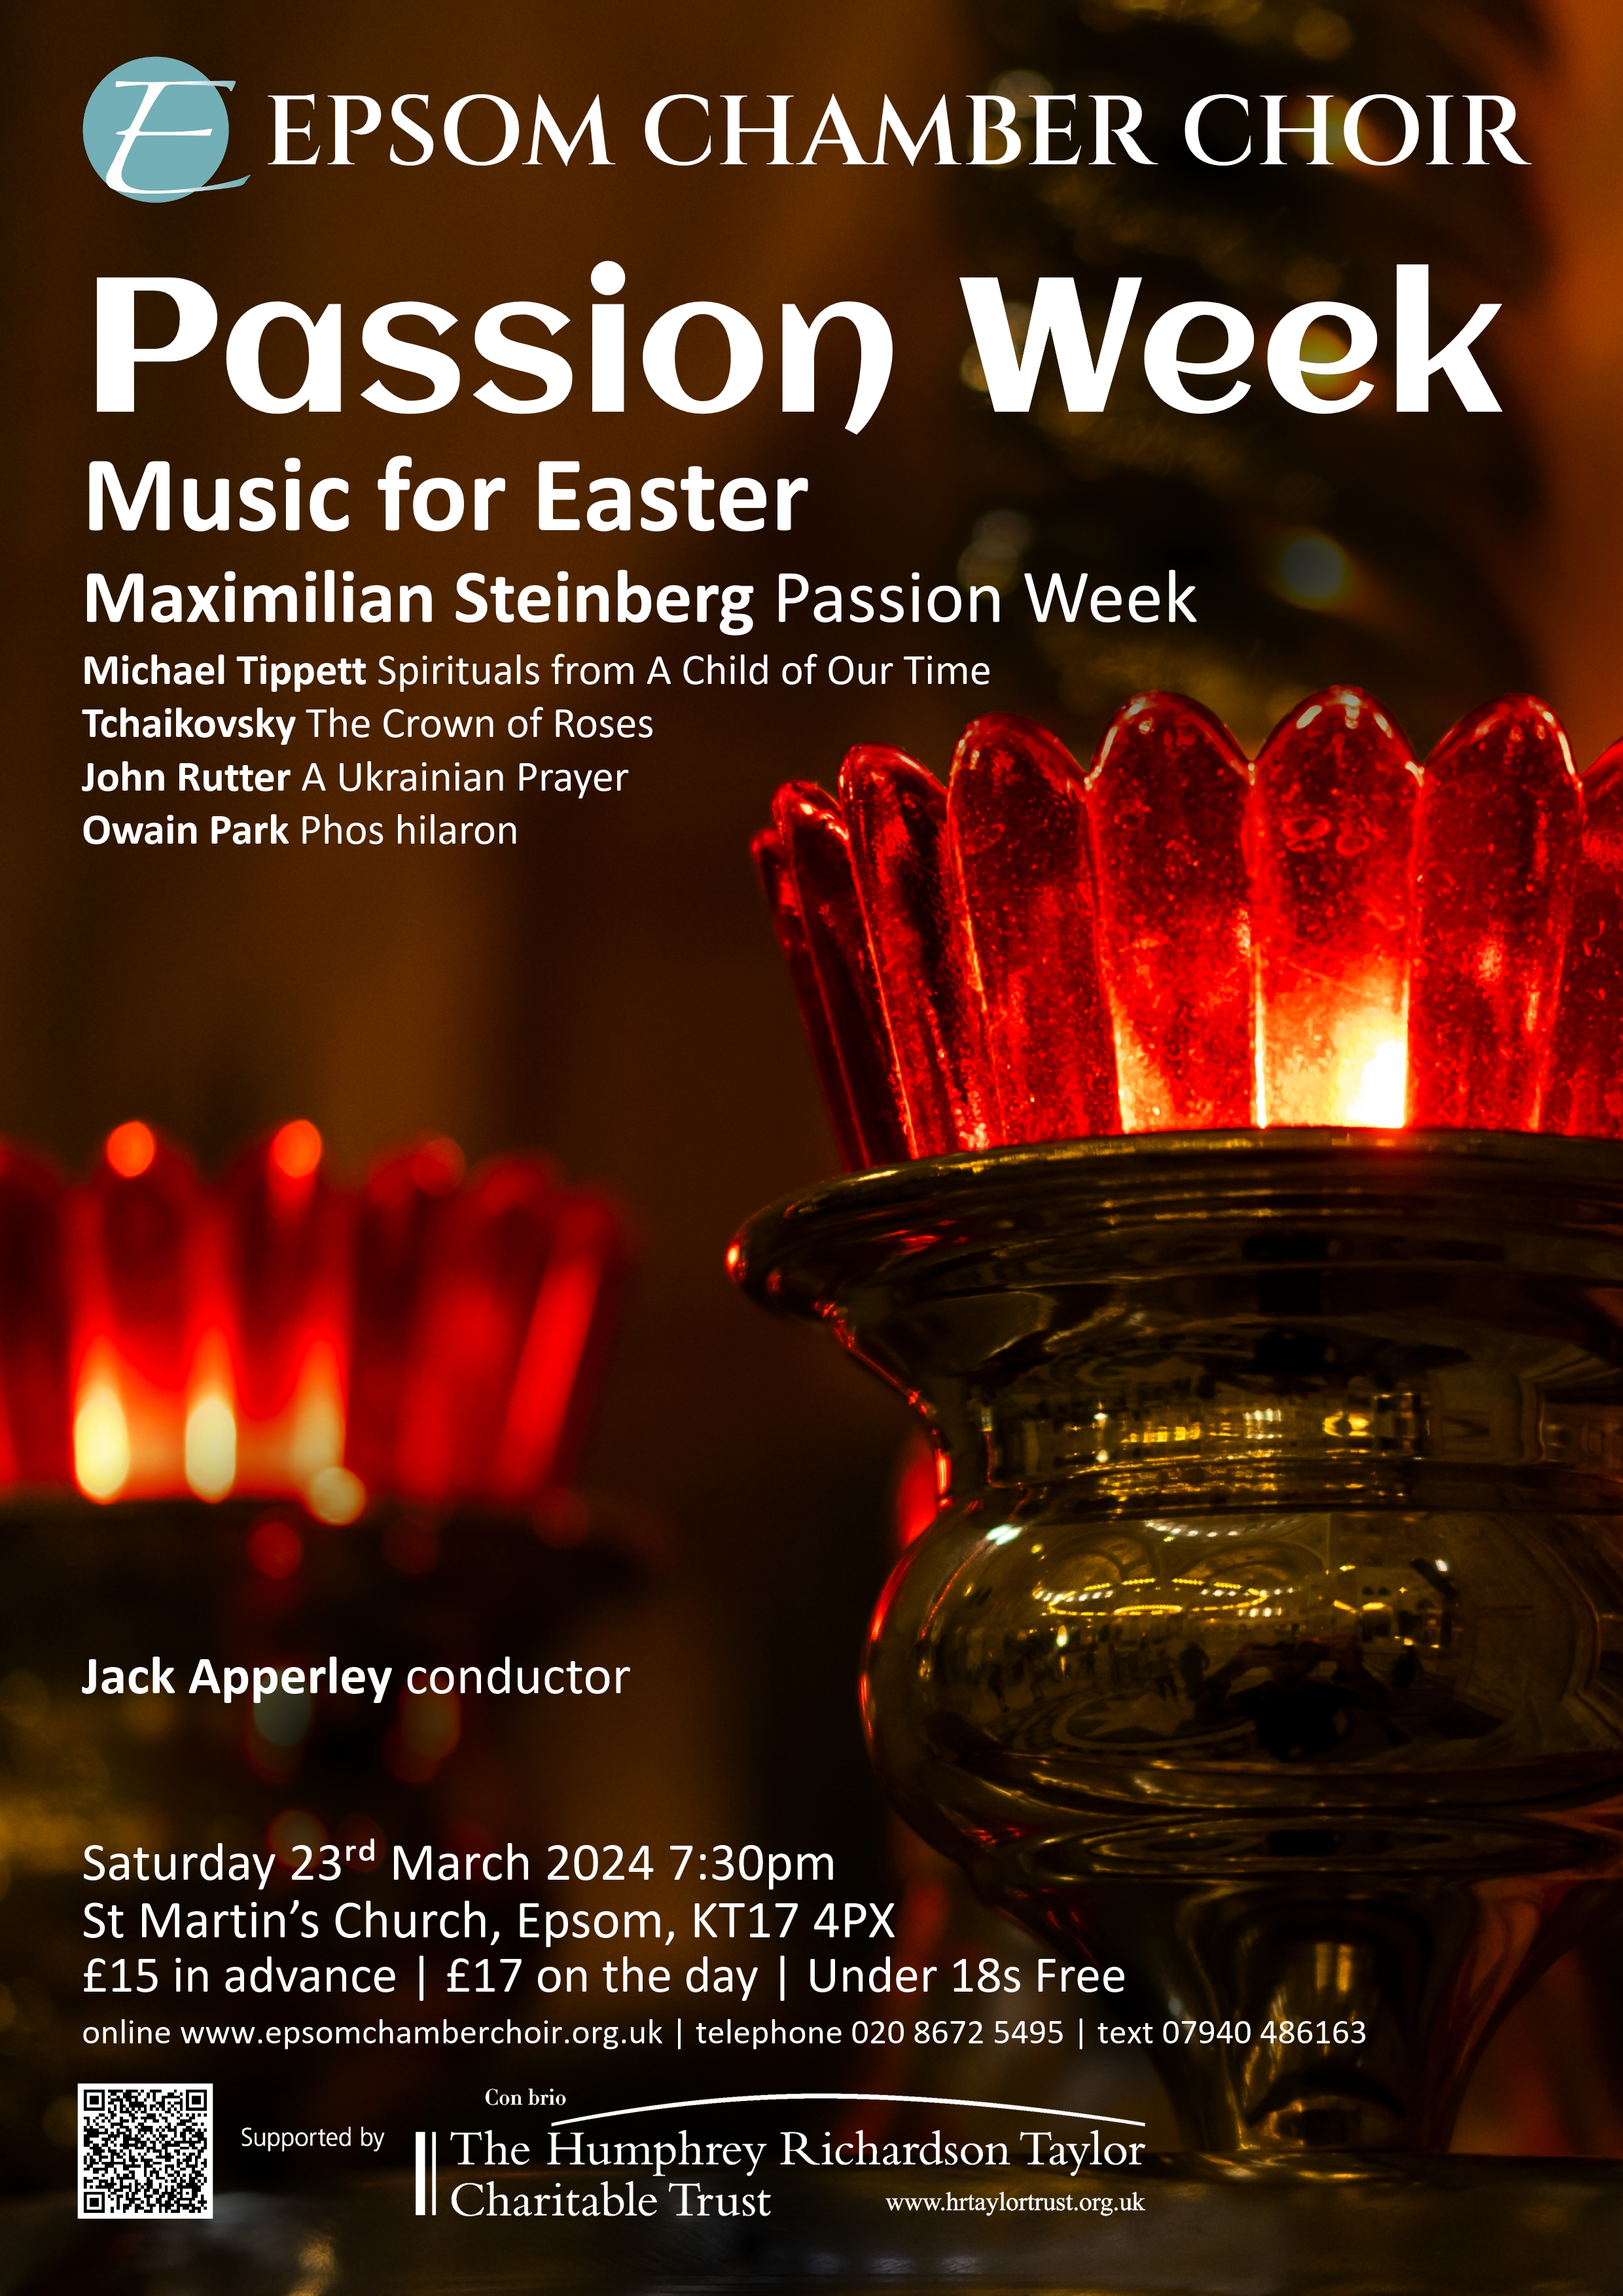 Passion Week Poster 23 March 7.30 pm St Martin's